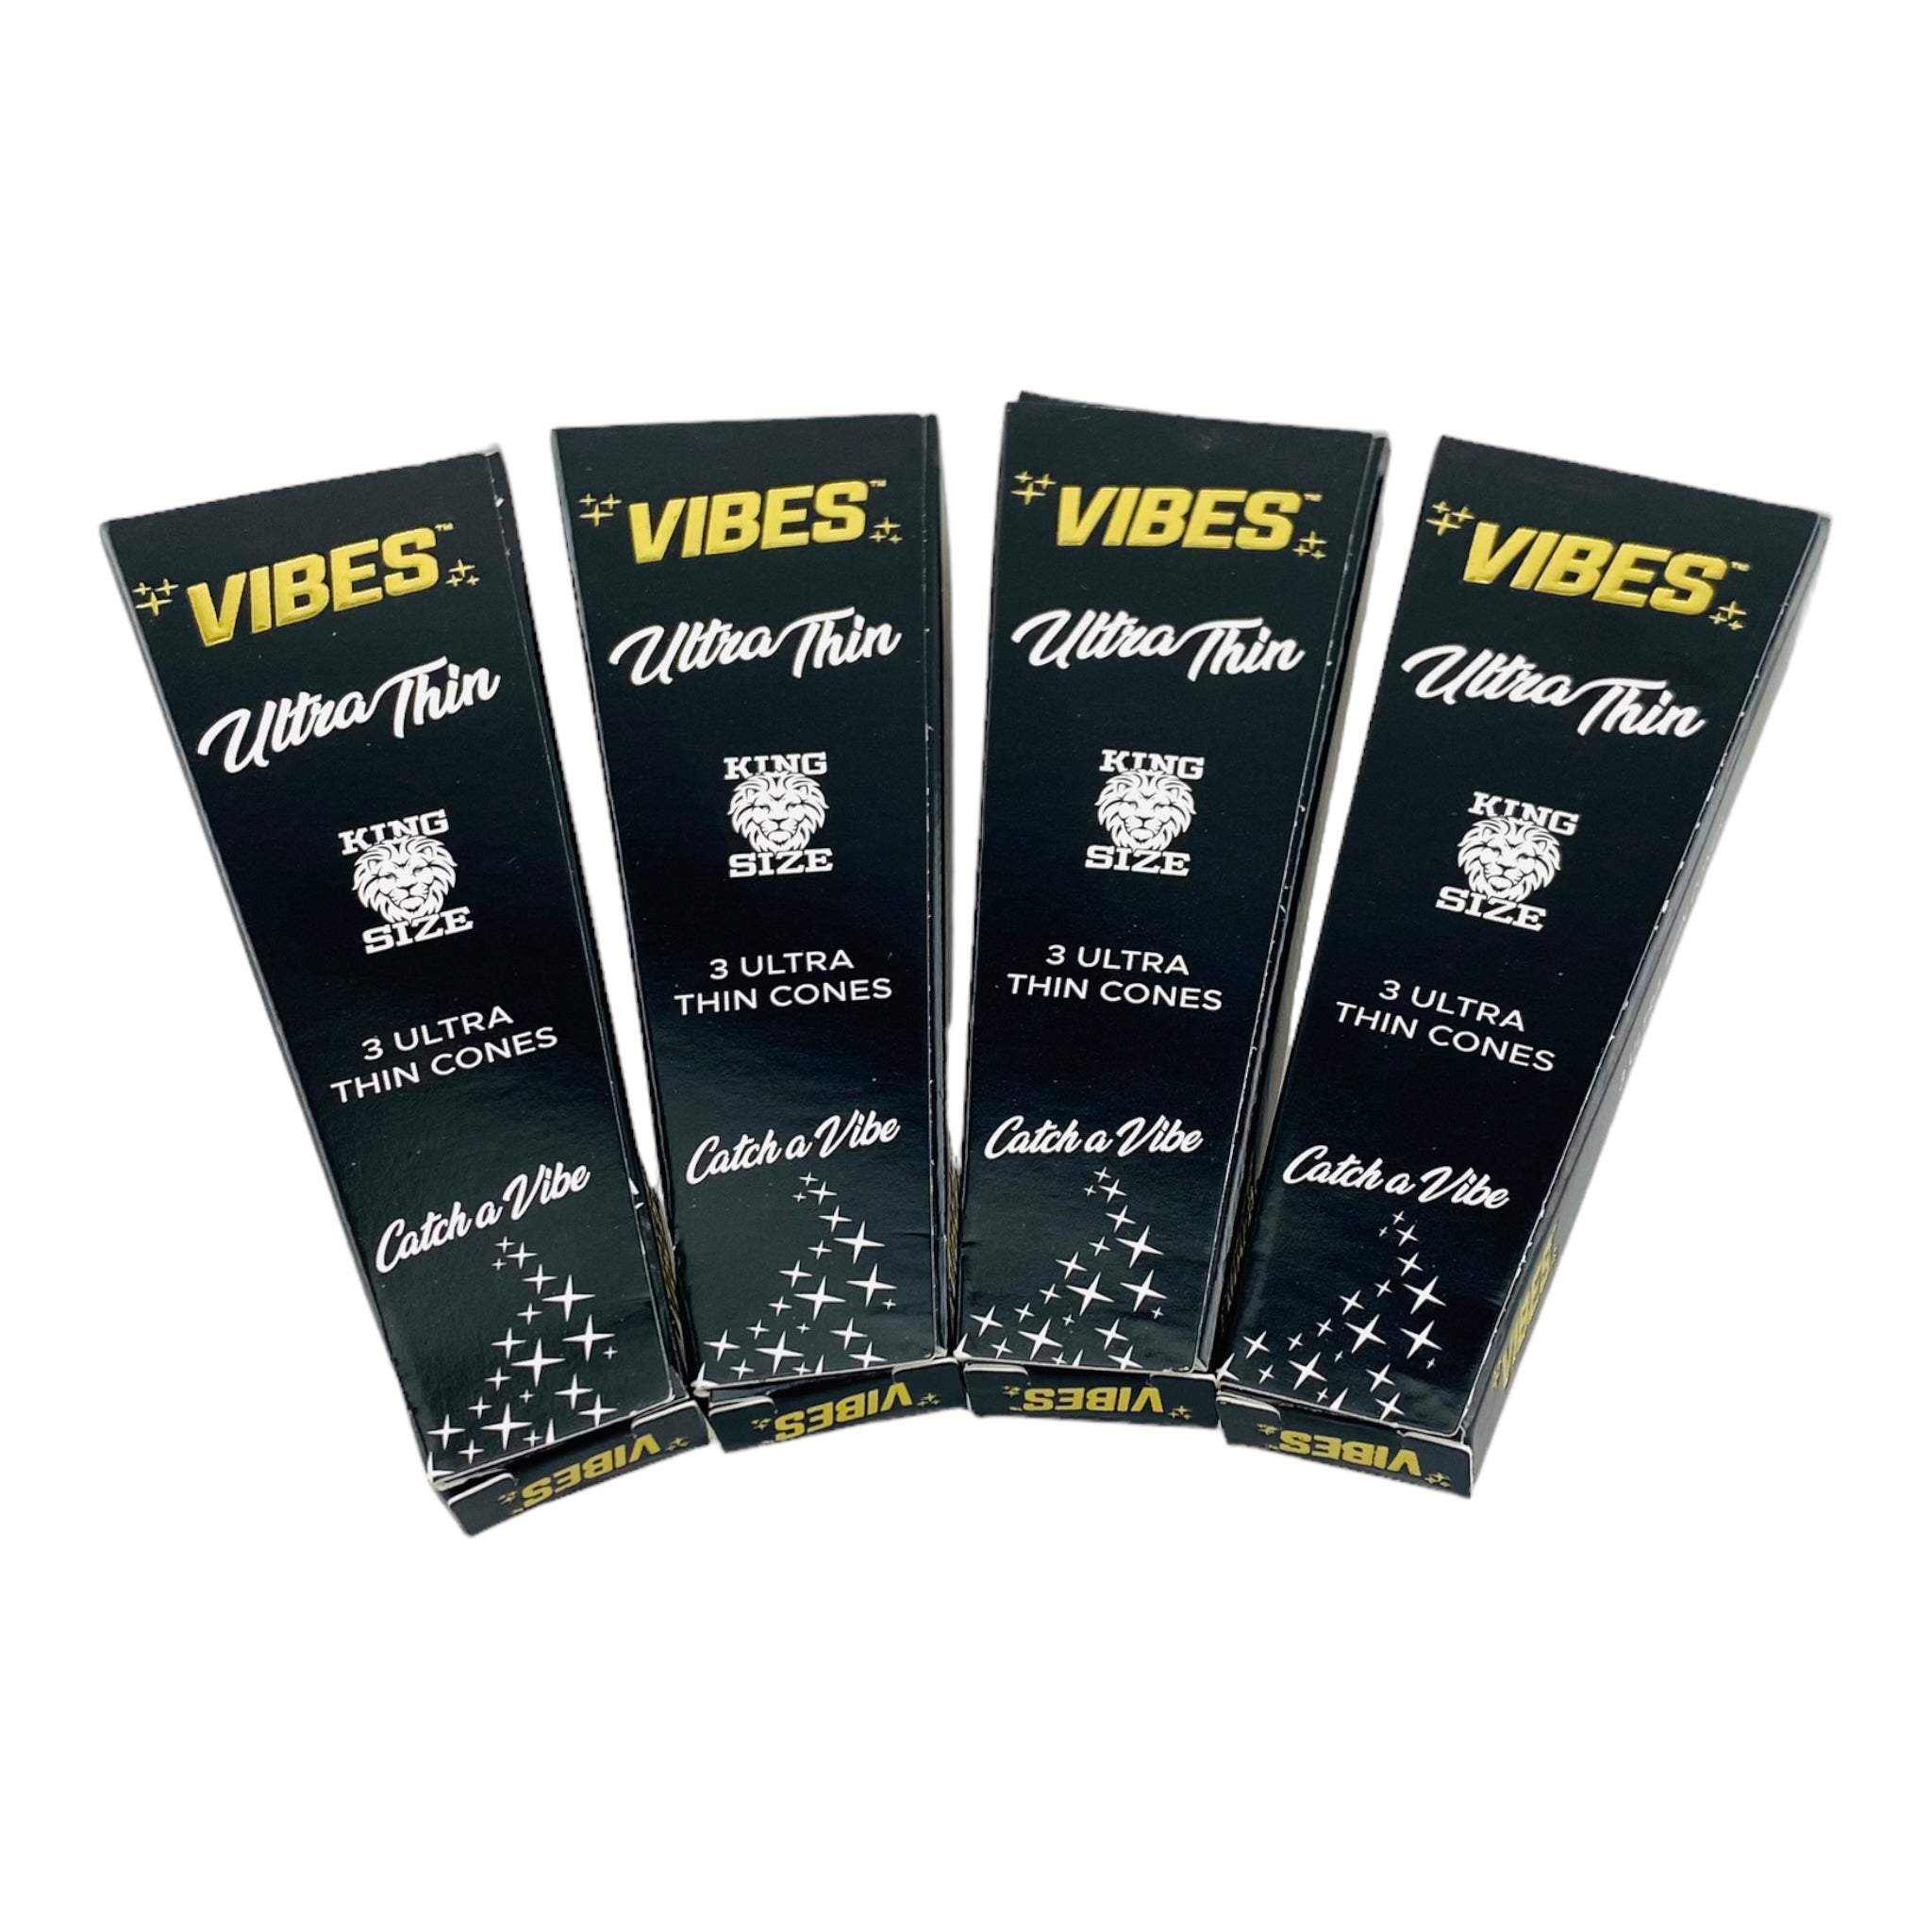 VIBES Ultra Thin King Size Cones - 4 Packs